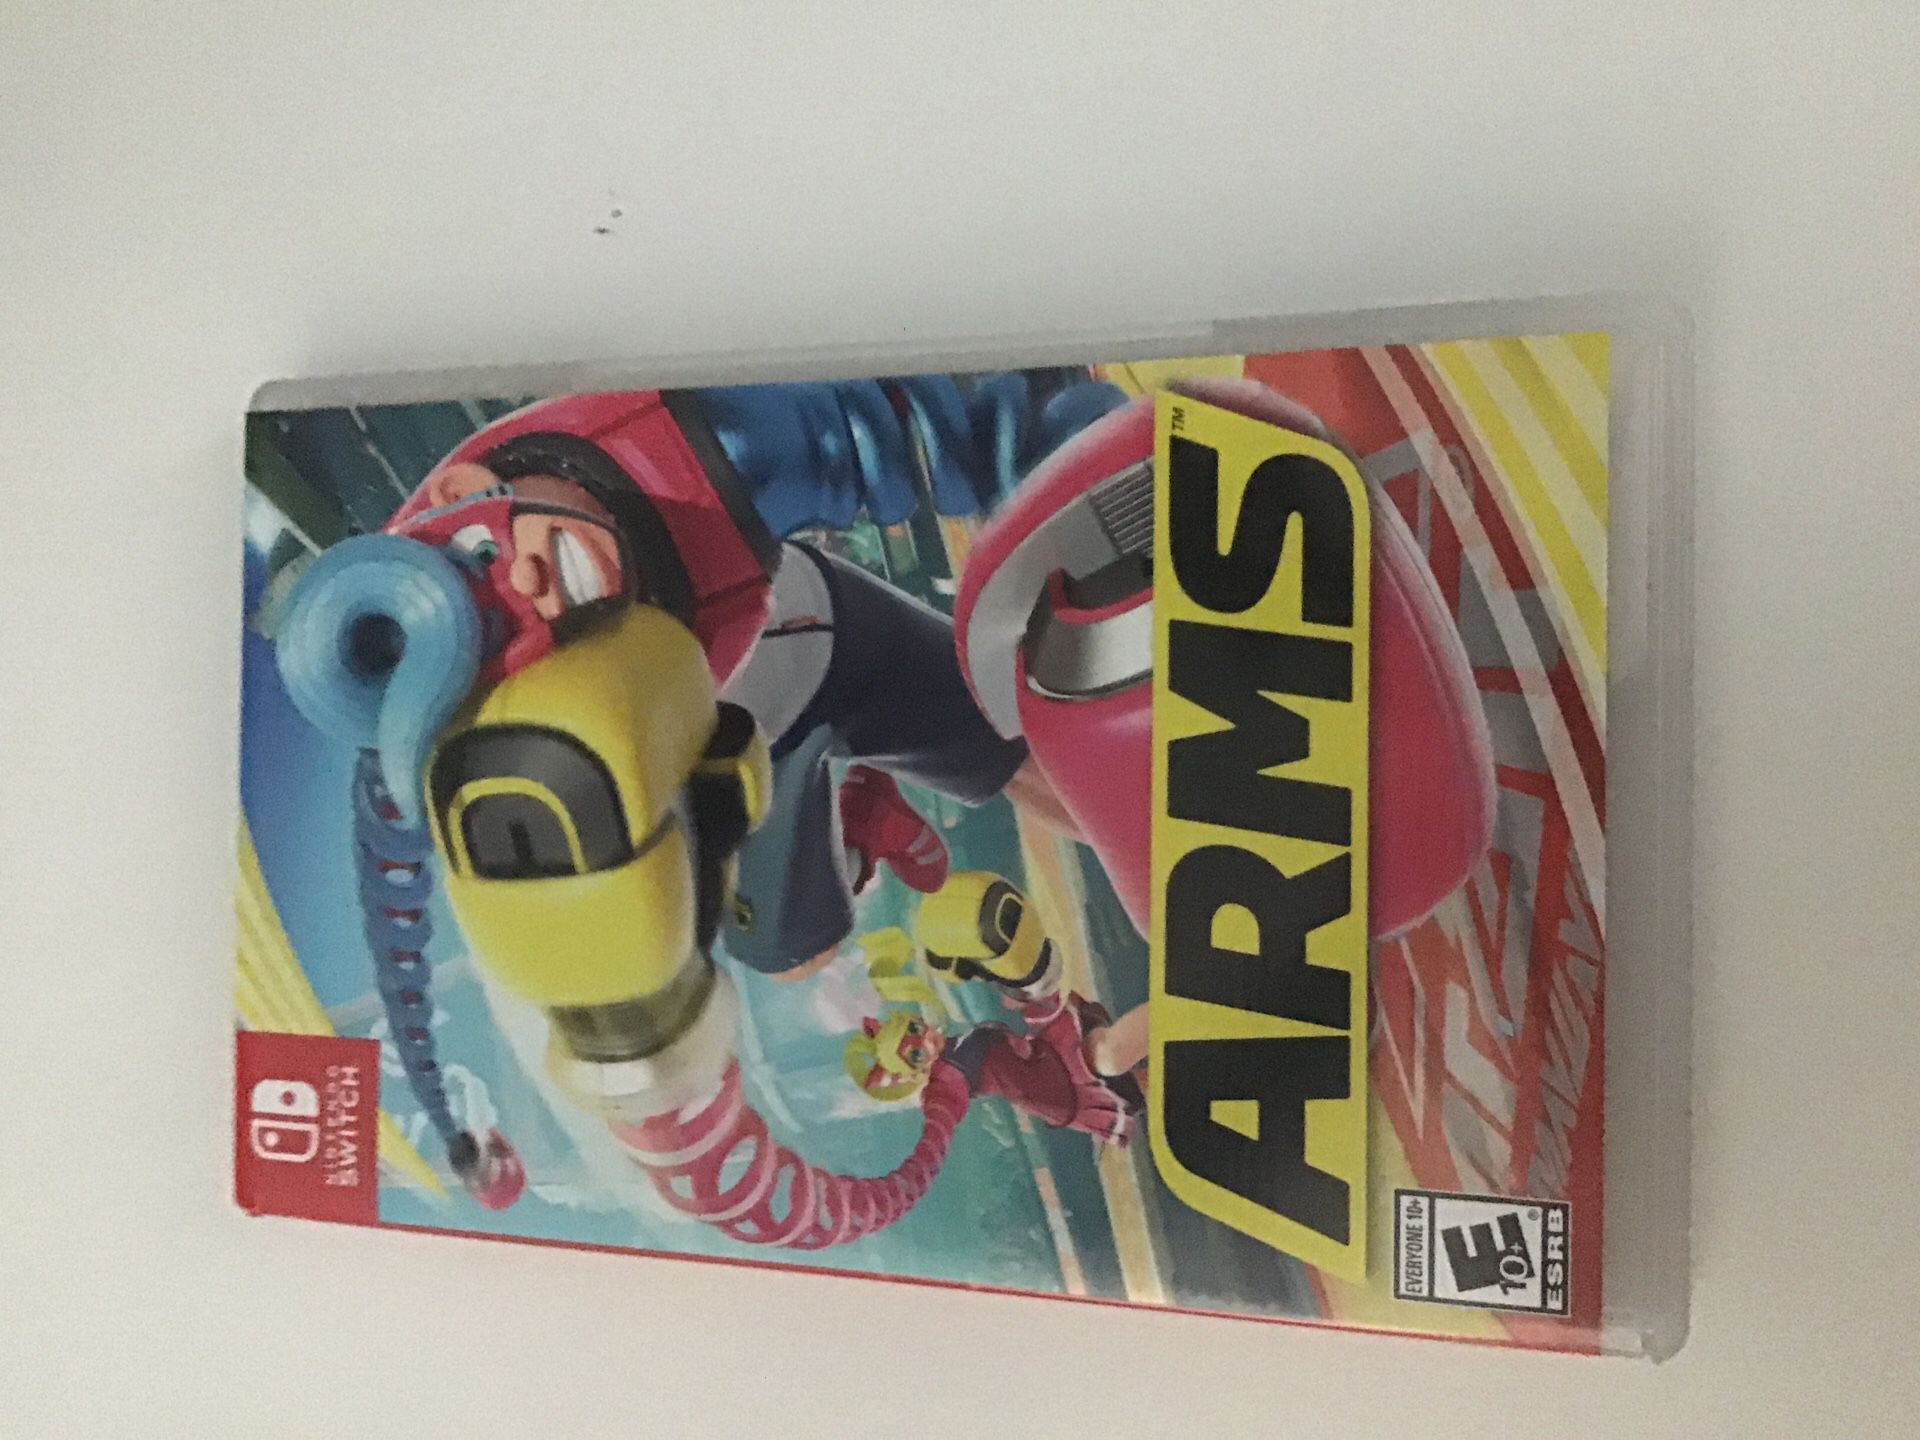 Arms Nintendo switch game